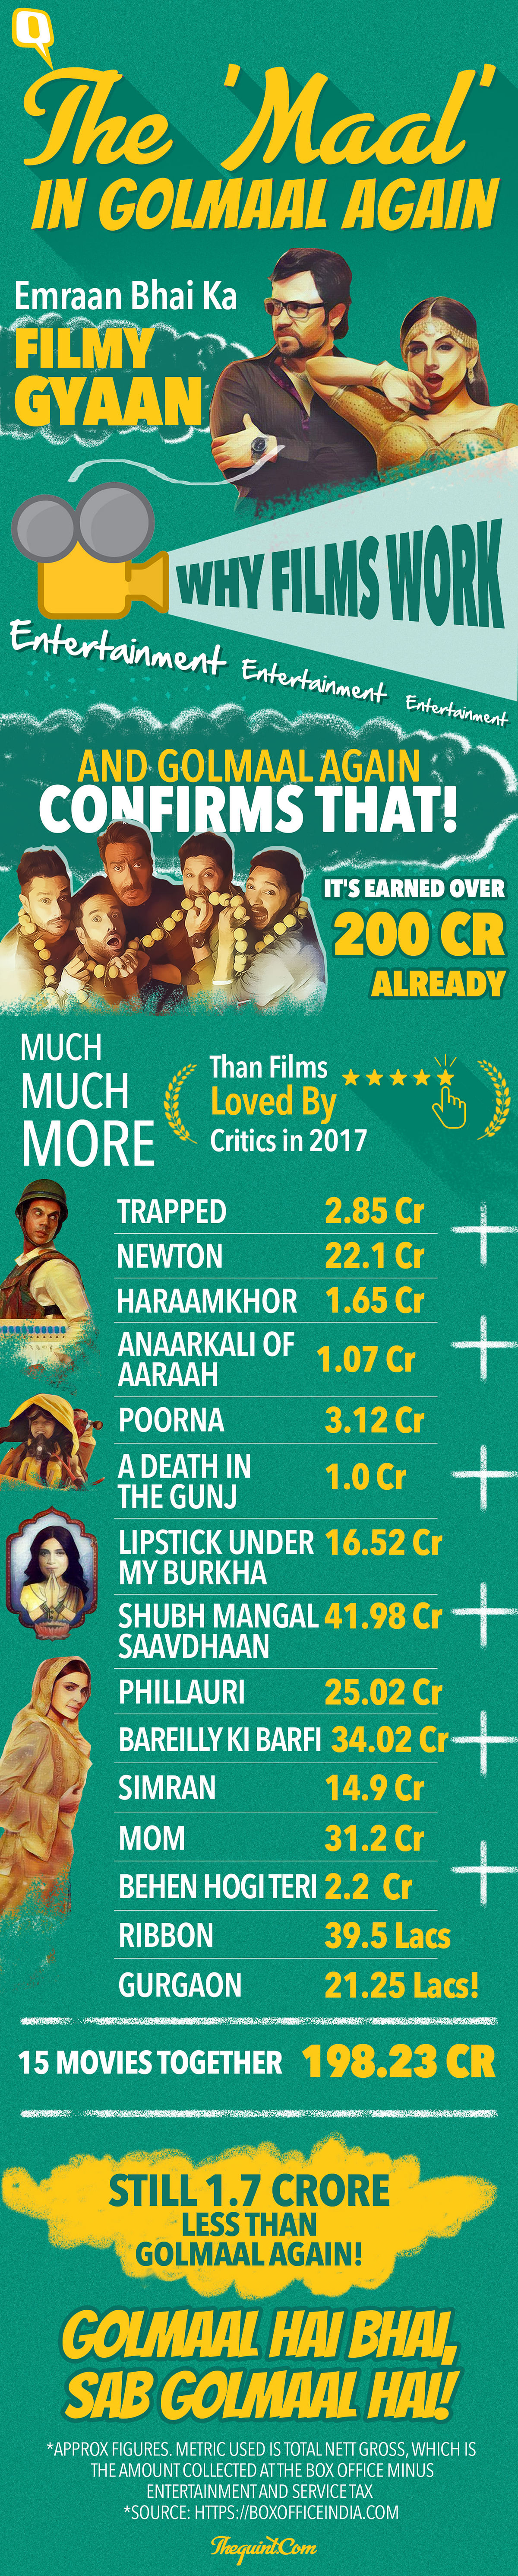 ‘Golmaal Again’ has made 200 crores, and here’s a crazy fact: That’s more than 15 of this year’s top rated films!